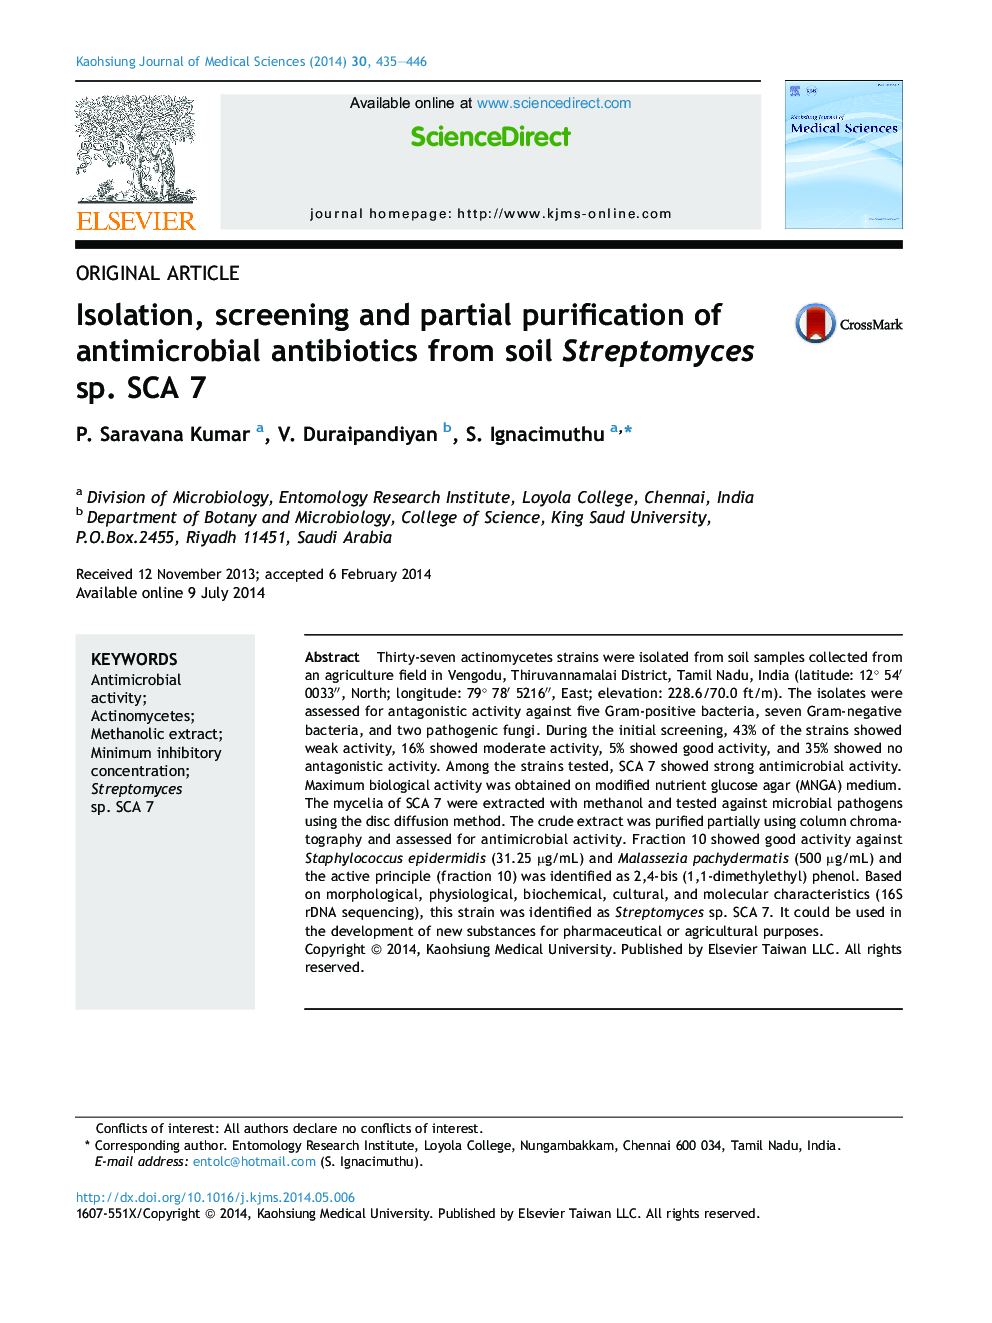 Isolation, screening and partial purification of antimicrobial antibiotics from soil Streptomyces sp. SCA 7 